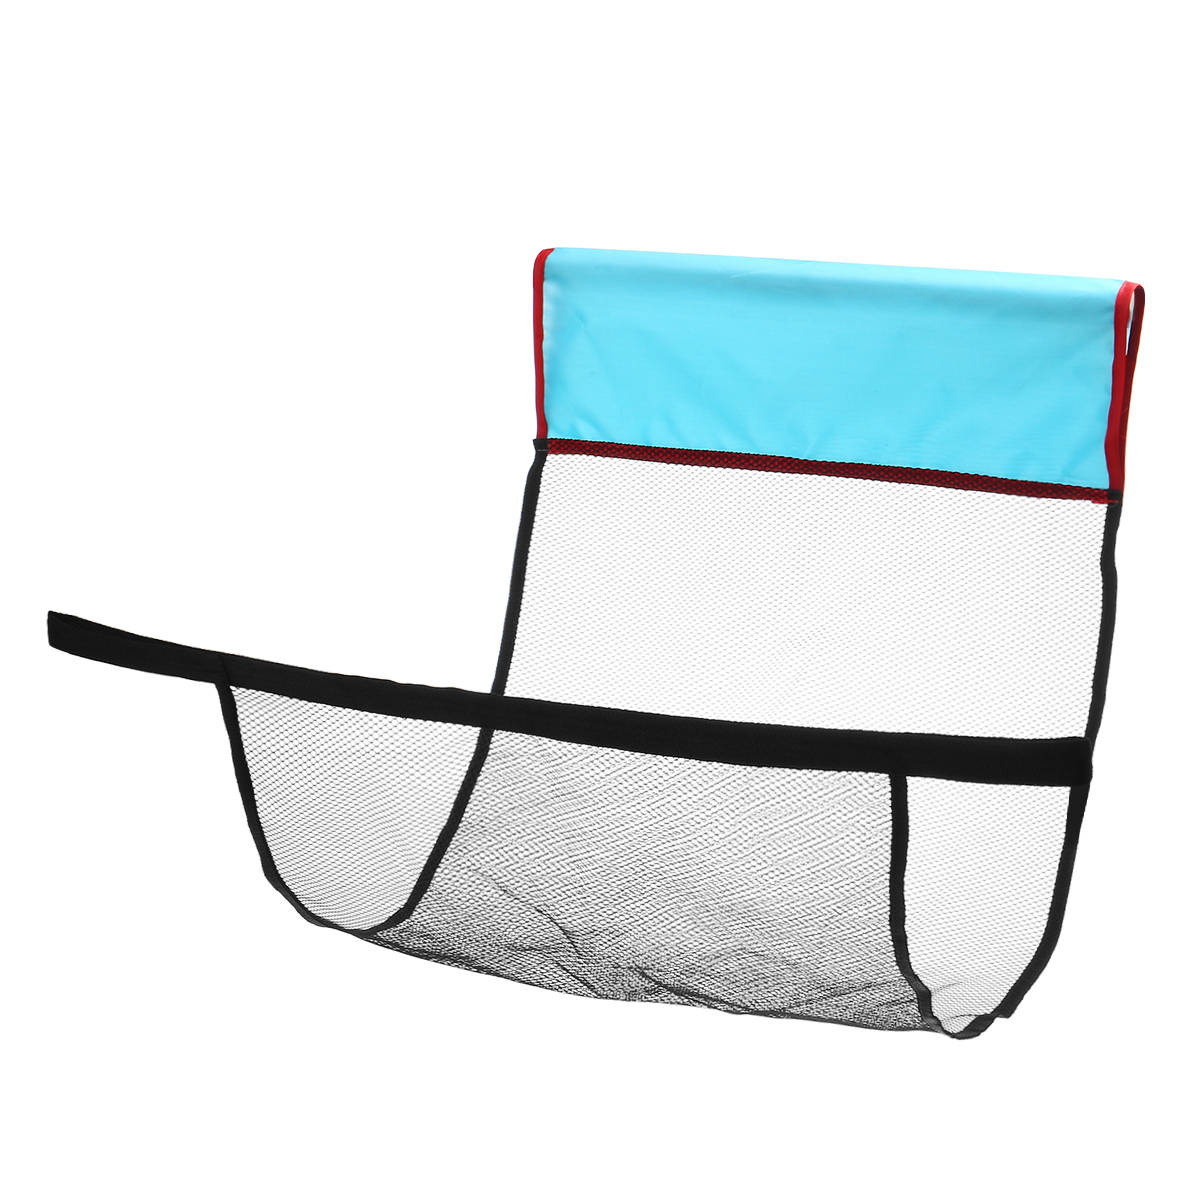 Swimming Floating Chair Noodle Net Adult Kids Pool Water Float Bed Mesh Seat/Net - Auto GoShop